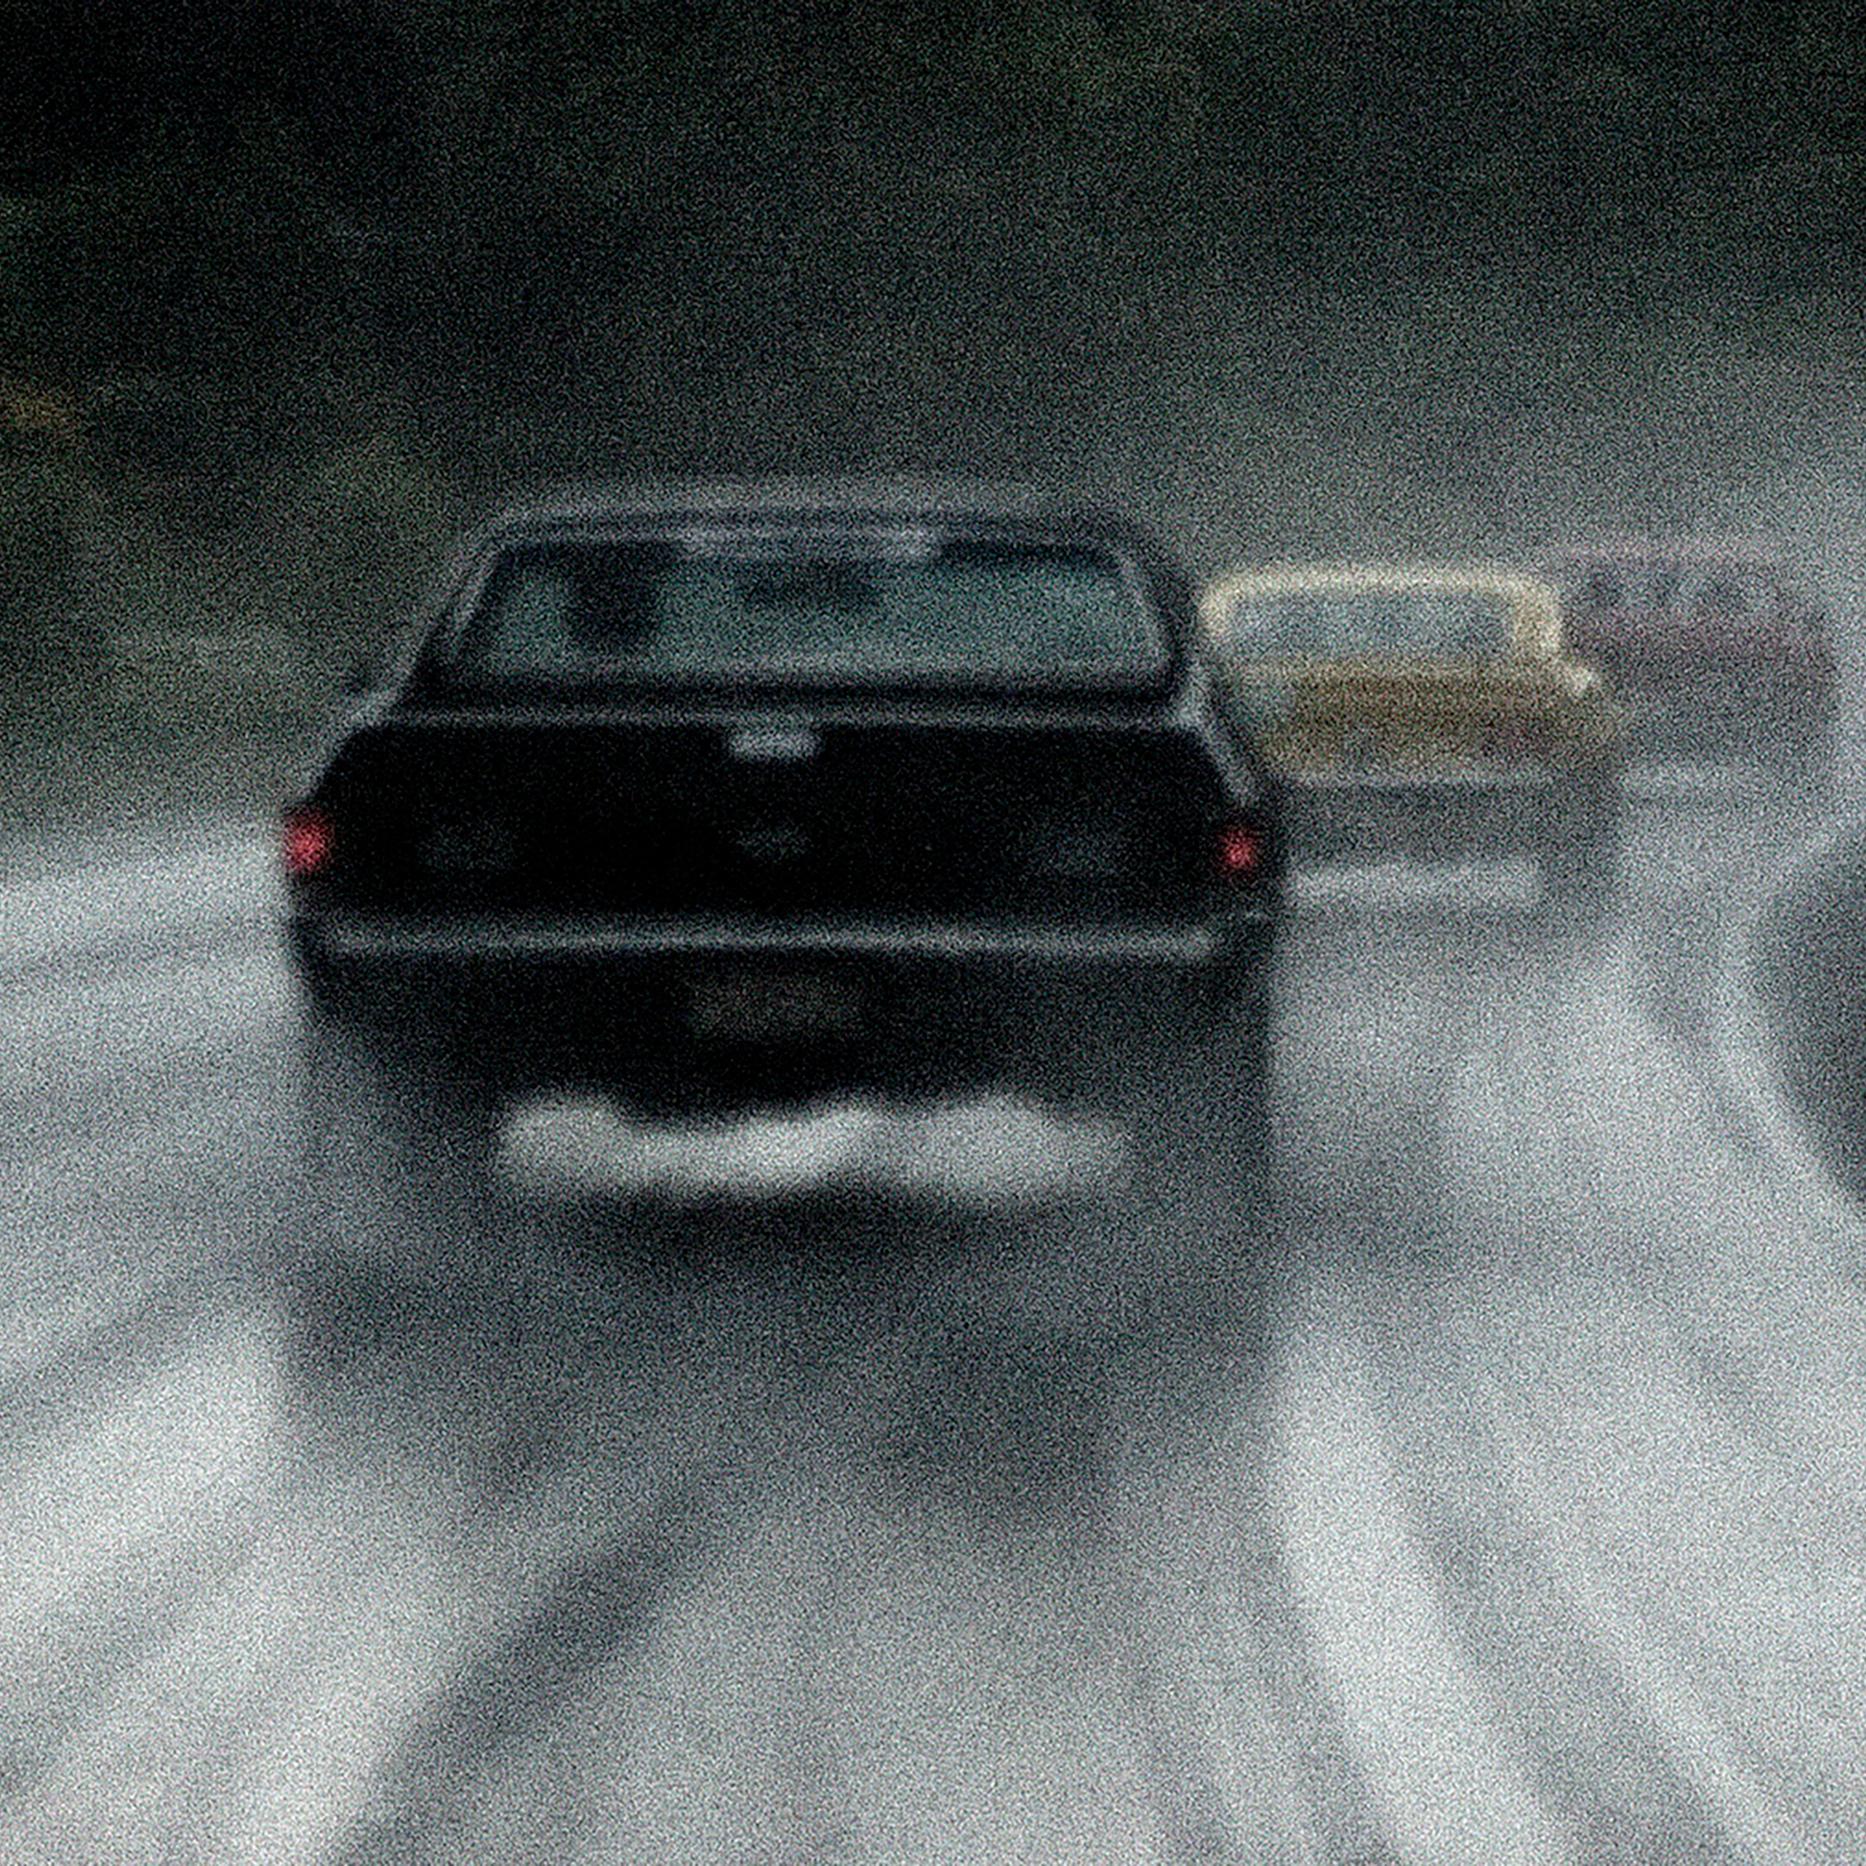 Heavy rain -Signed limited edition archival pigment print, Contemporary photo, USA - Black Color Photograph by Geoff Halpin